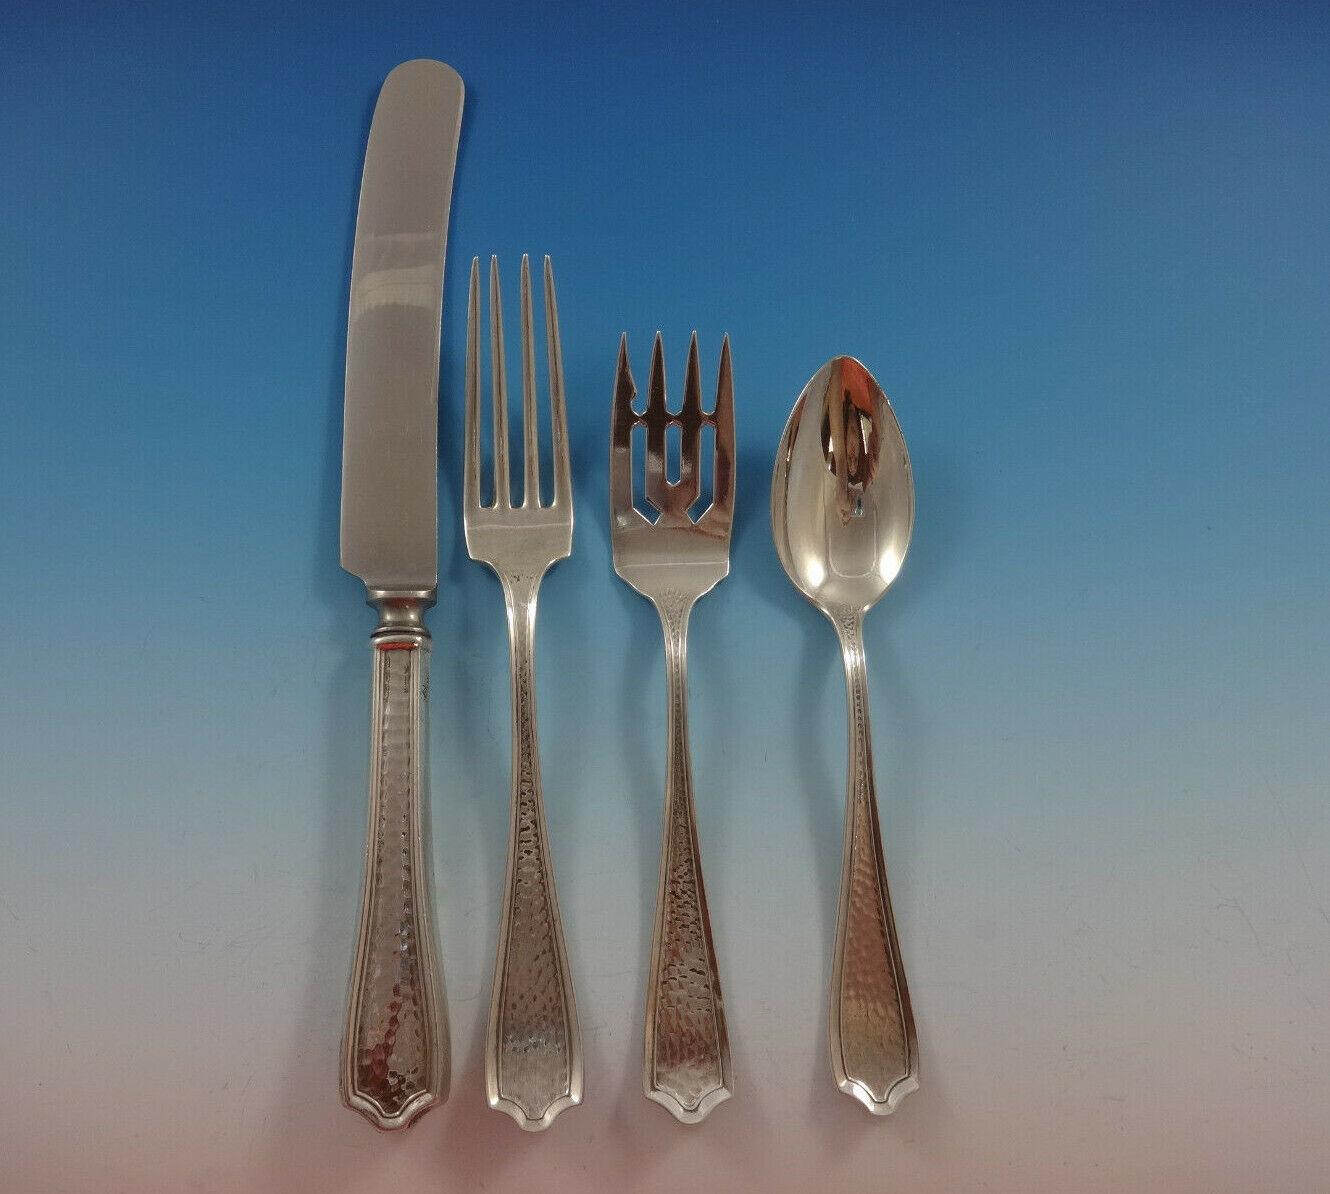 Fabulous MARYLAND HAND HAMMERED BY ALVIN sterling silver Flatware set - 46 Pieces. This rare set has a beautiful, subtle hand hammered finish and includes:

8 KNIVES, 9